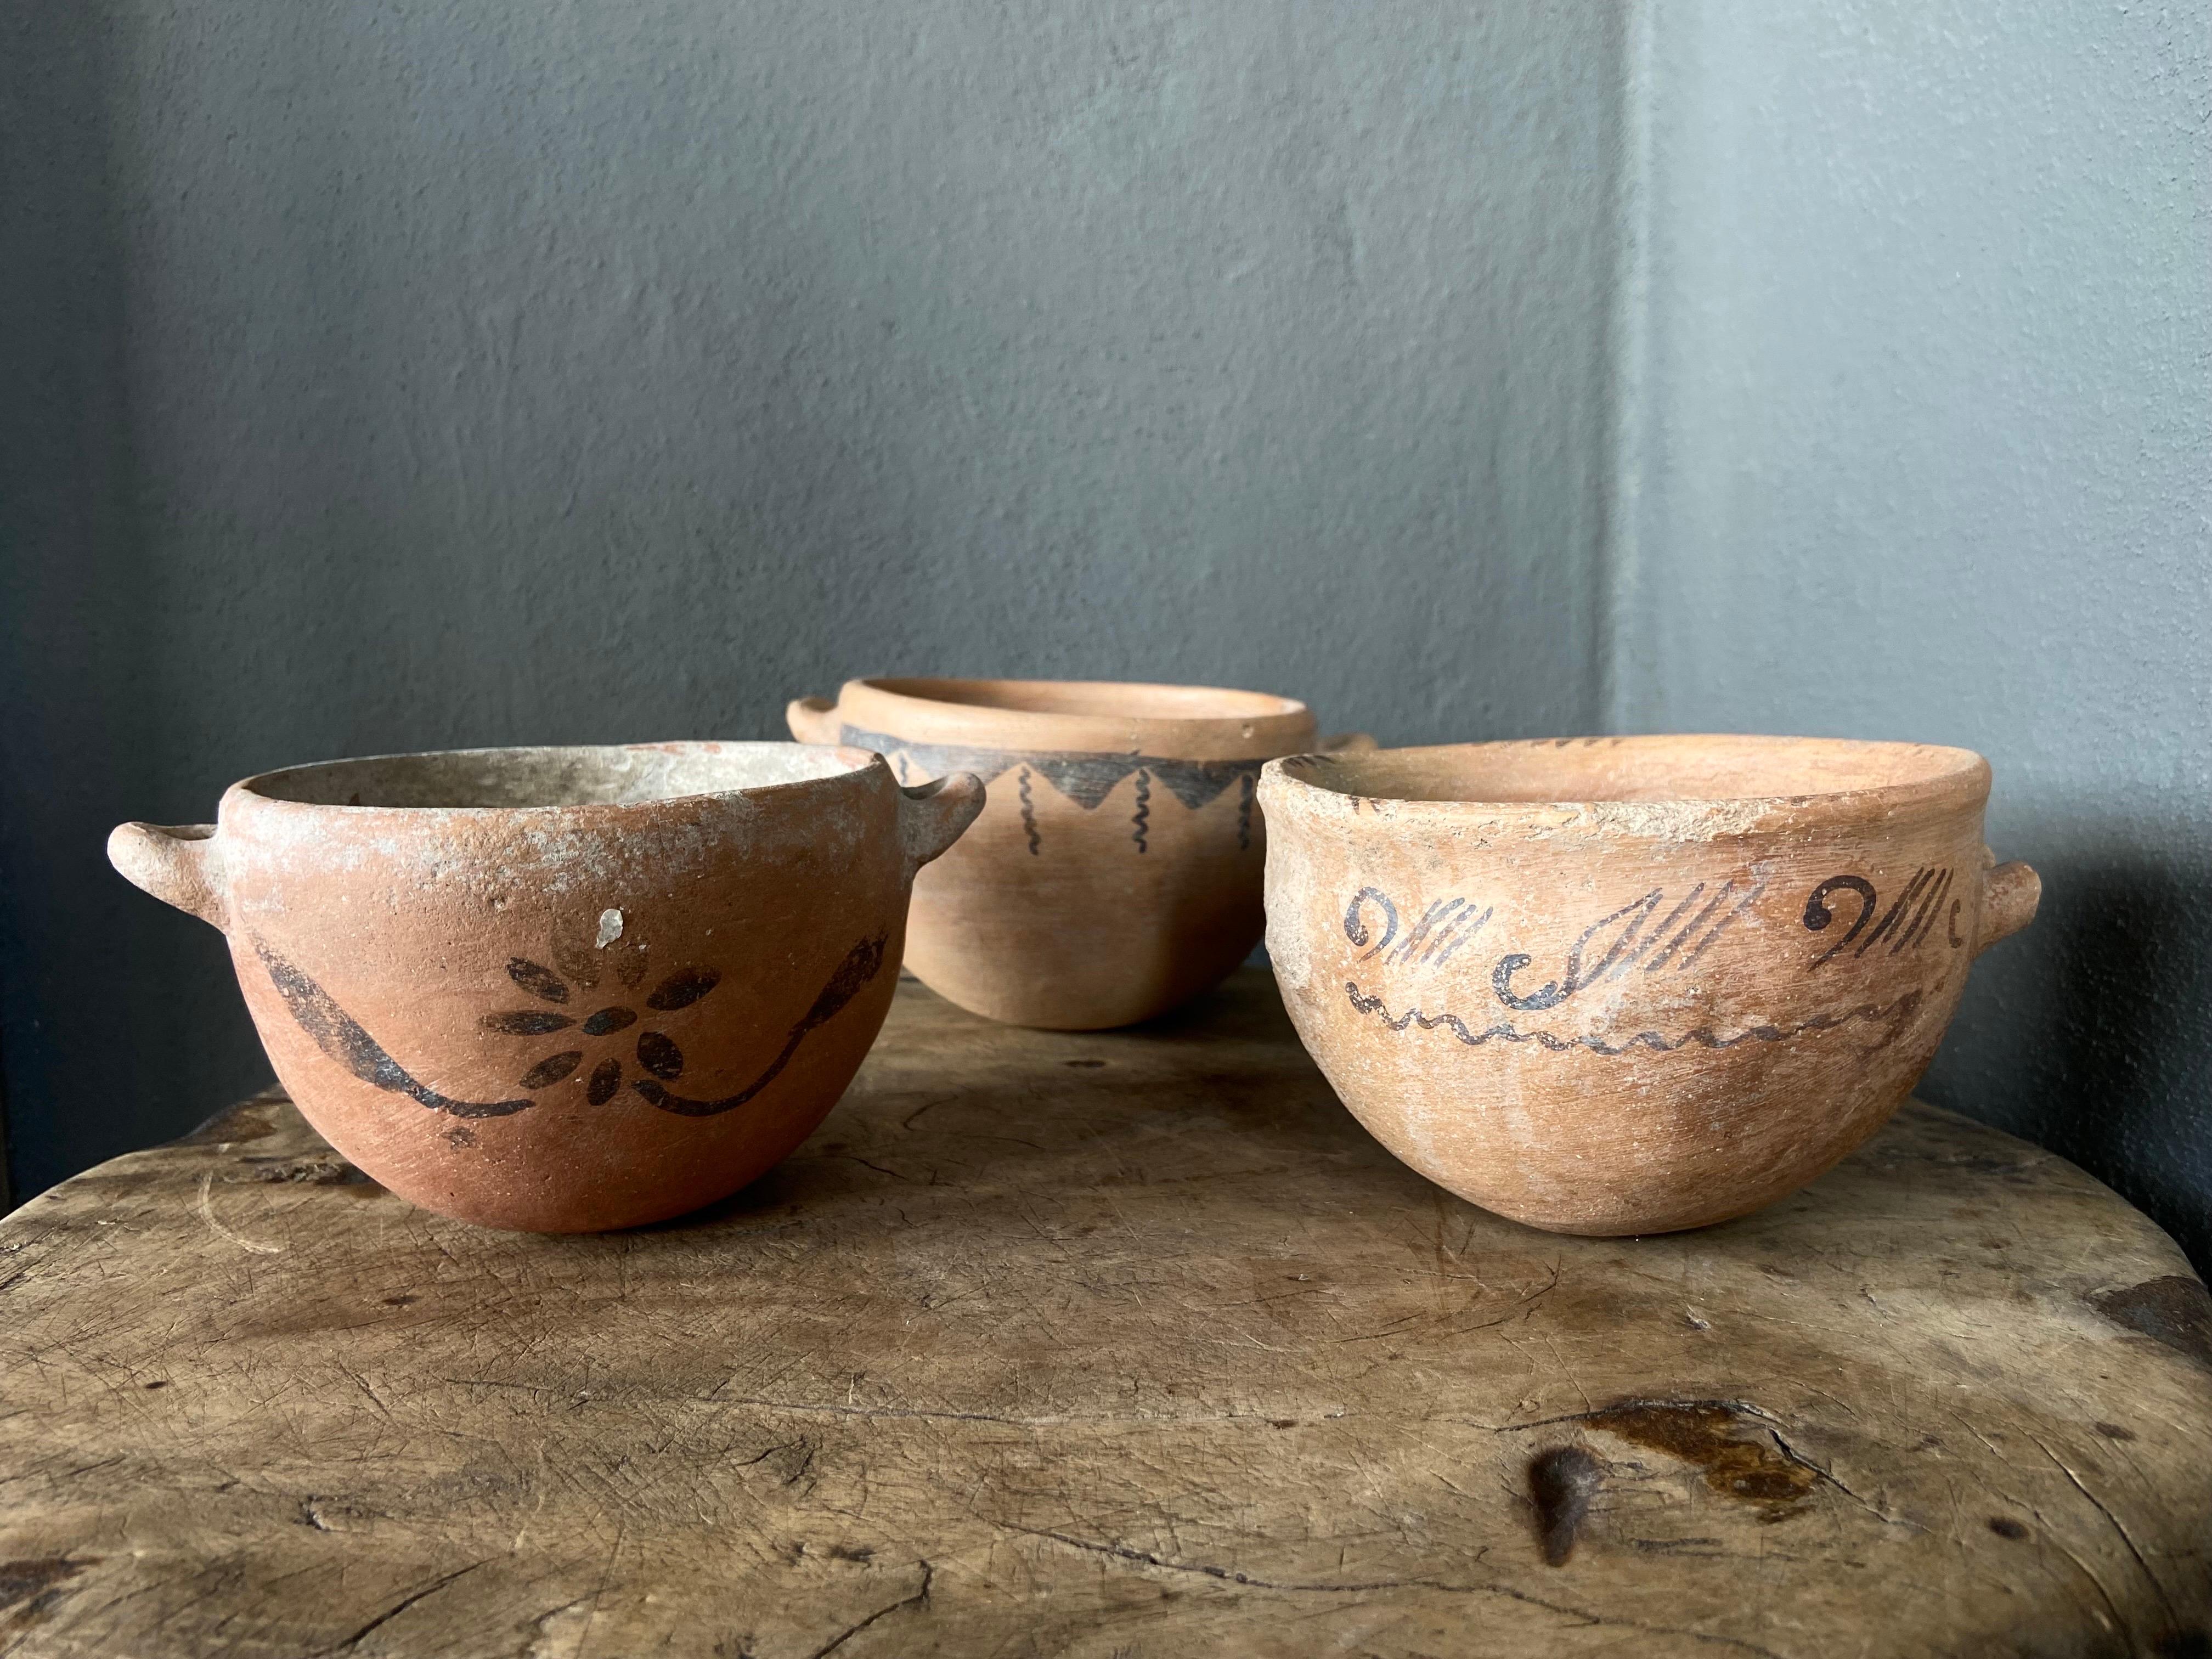 Set of 3 ceramic hand painted bowls from San Agustin Oapan, Guerrero, Mexico. These bowls were typically used for condiments.